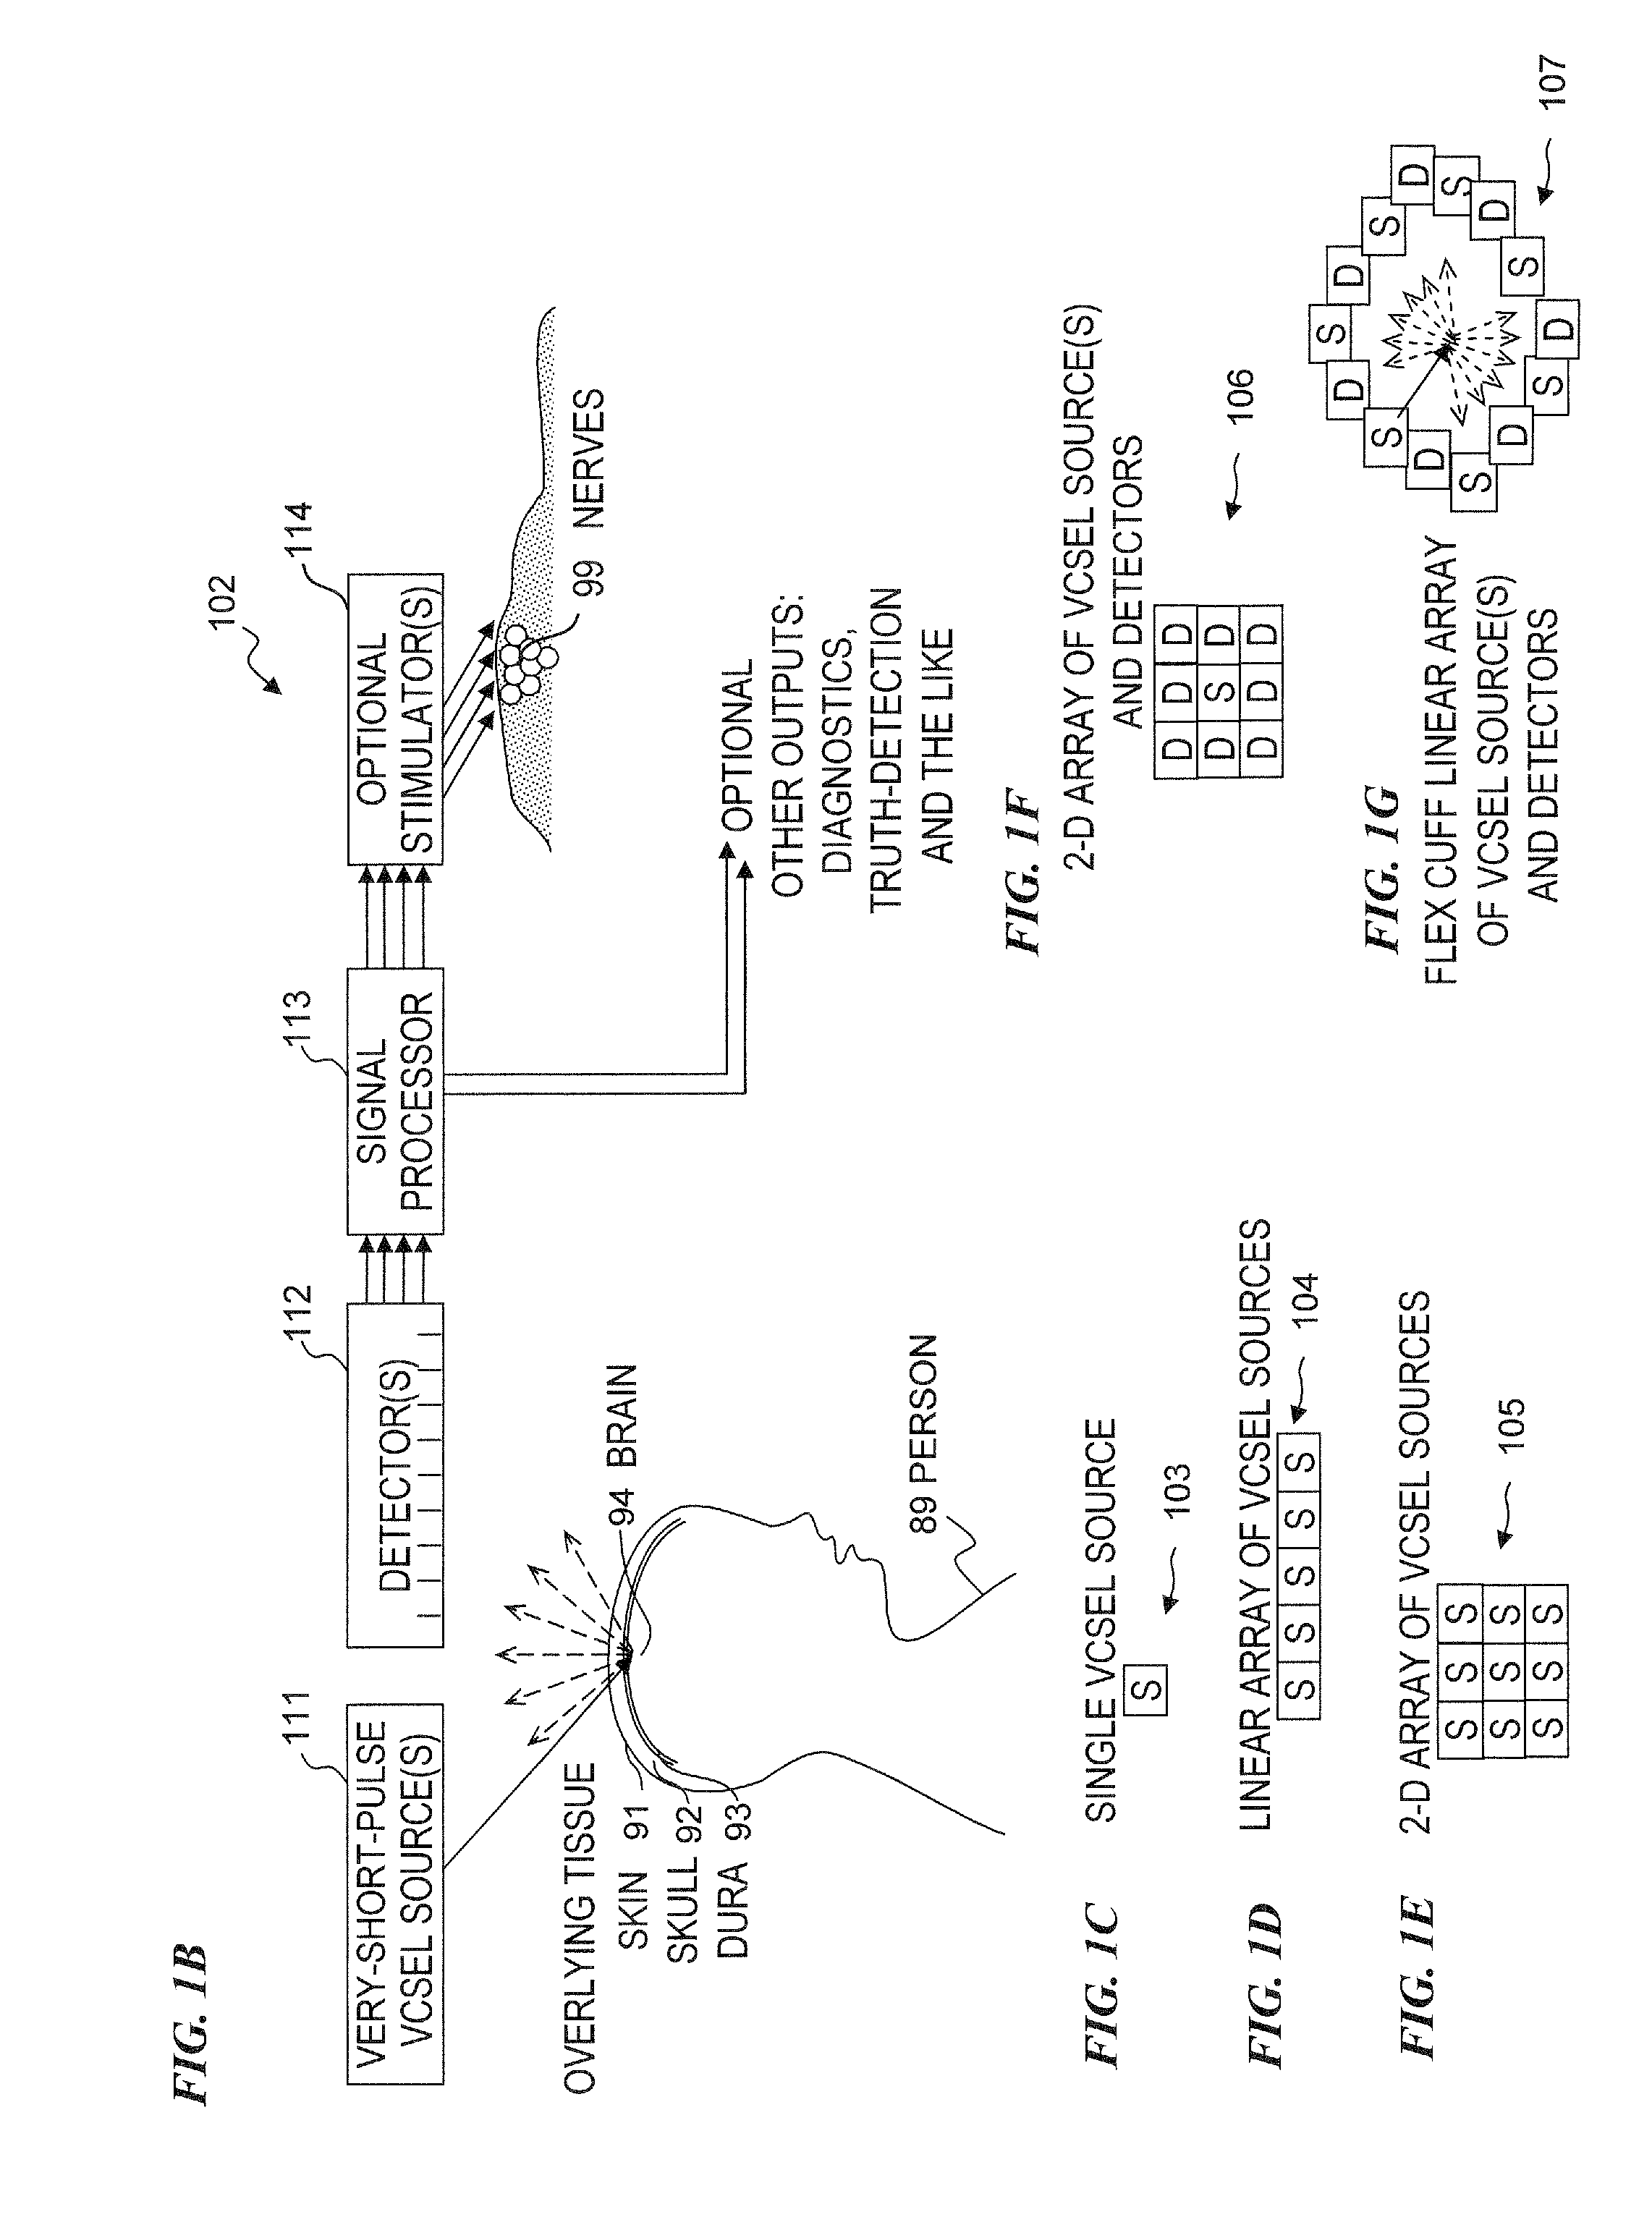 Apparatus and method for neural-signal capture to drive neuroprostheses or control bodily function